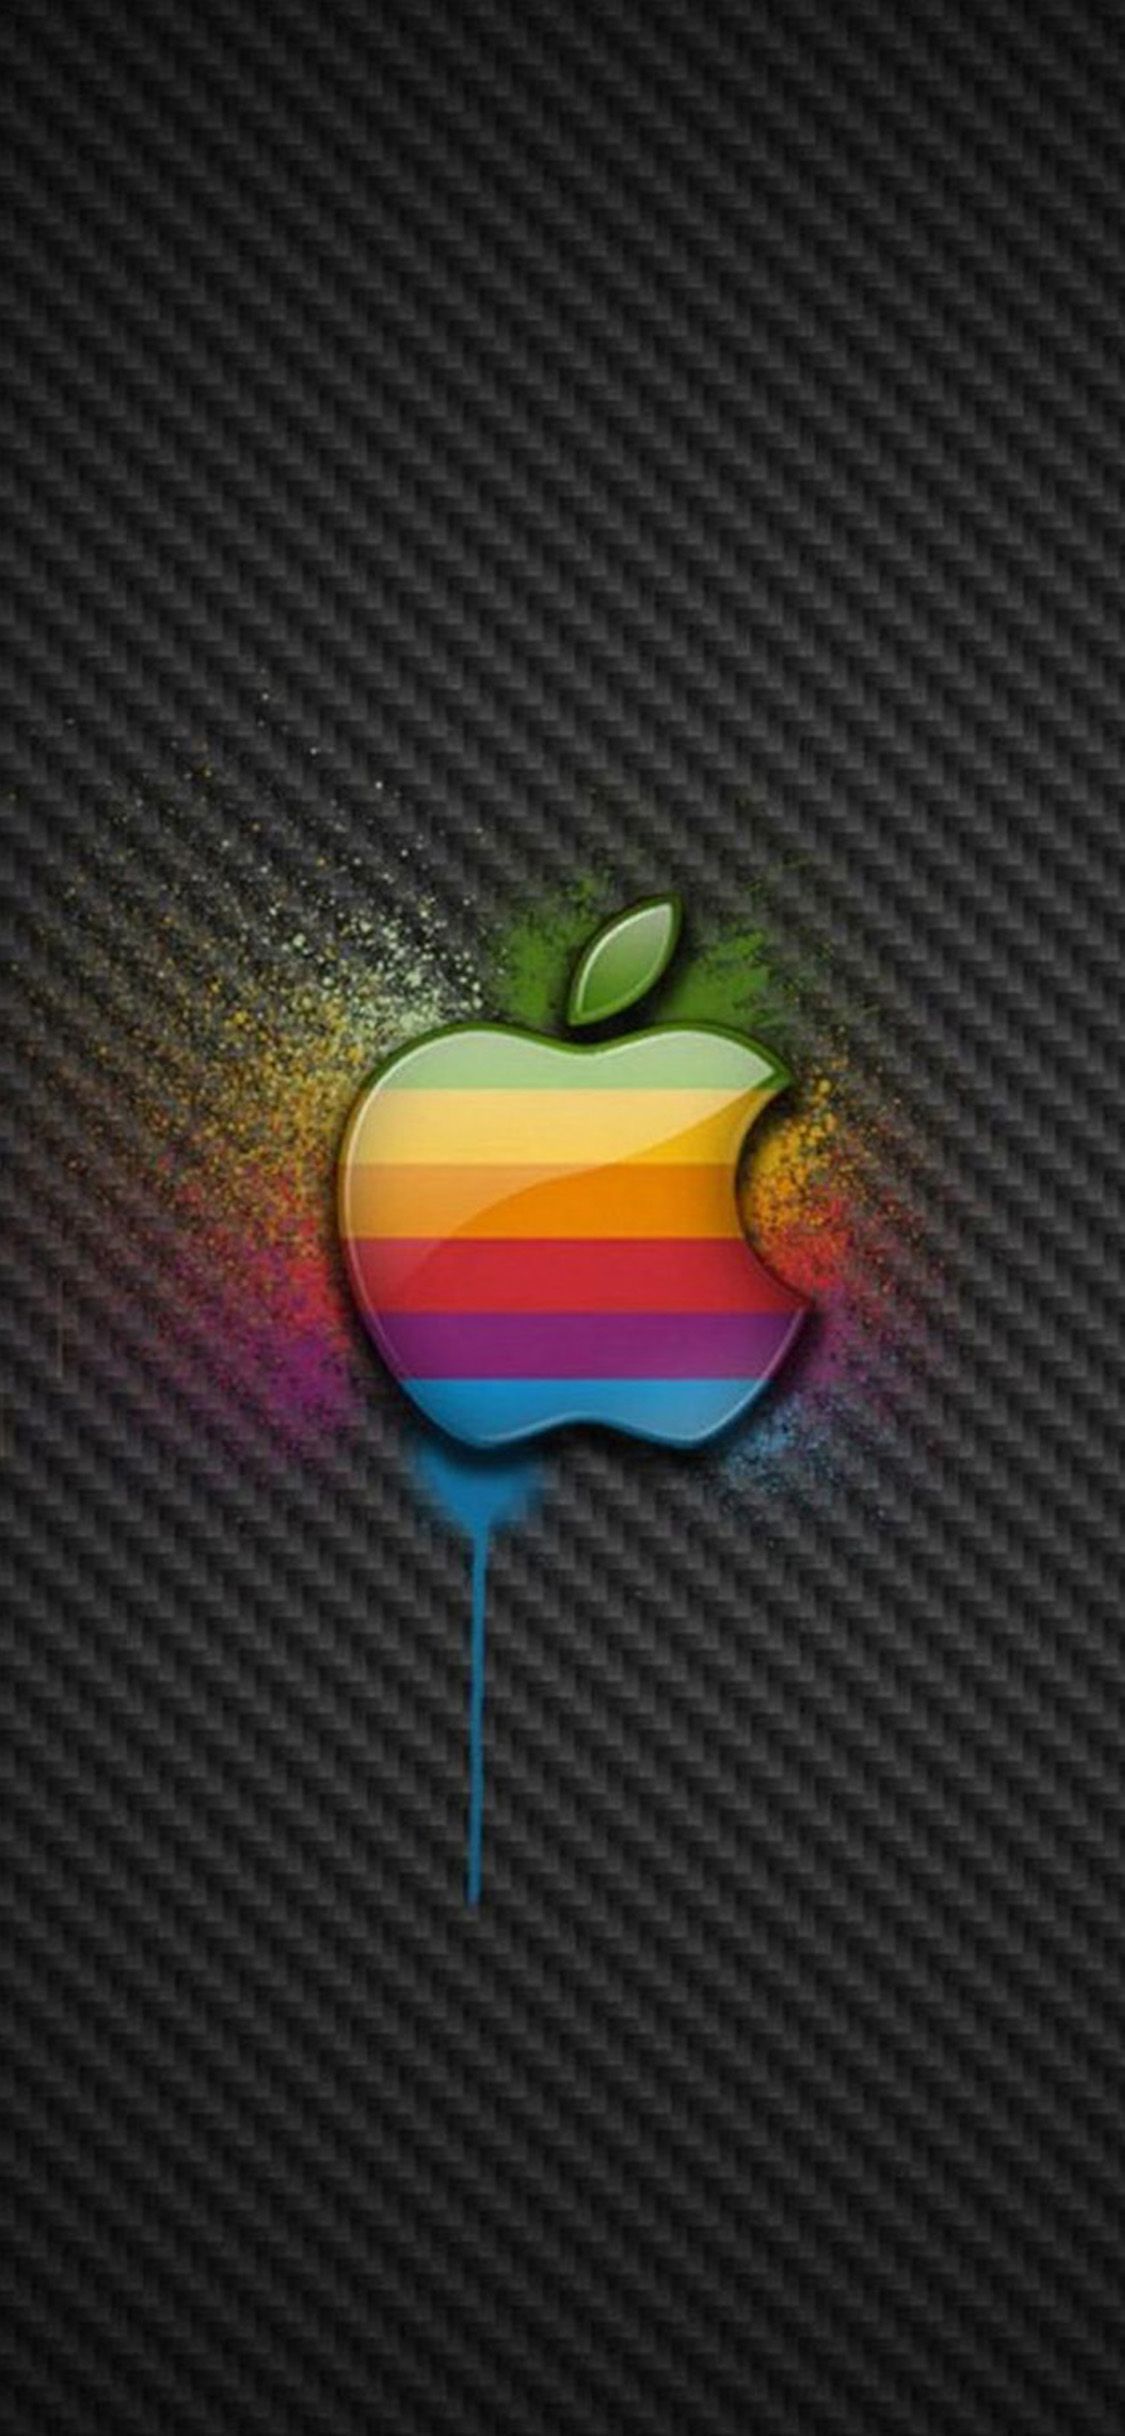 Colorful Apple Logo Wallpapers - 4k, HD Colorful Apple Logo Backgrounds ...